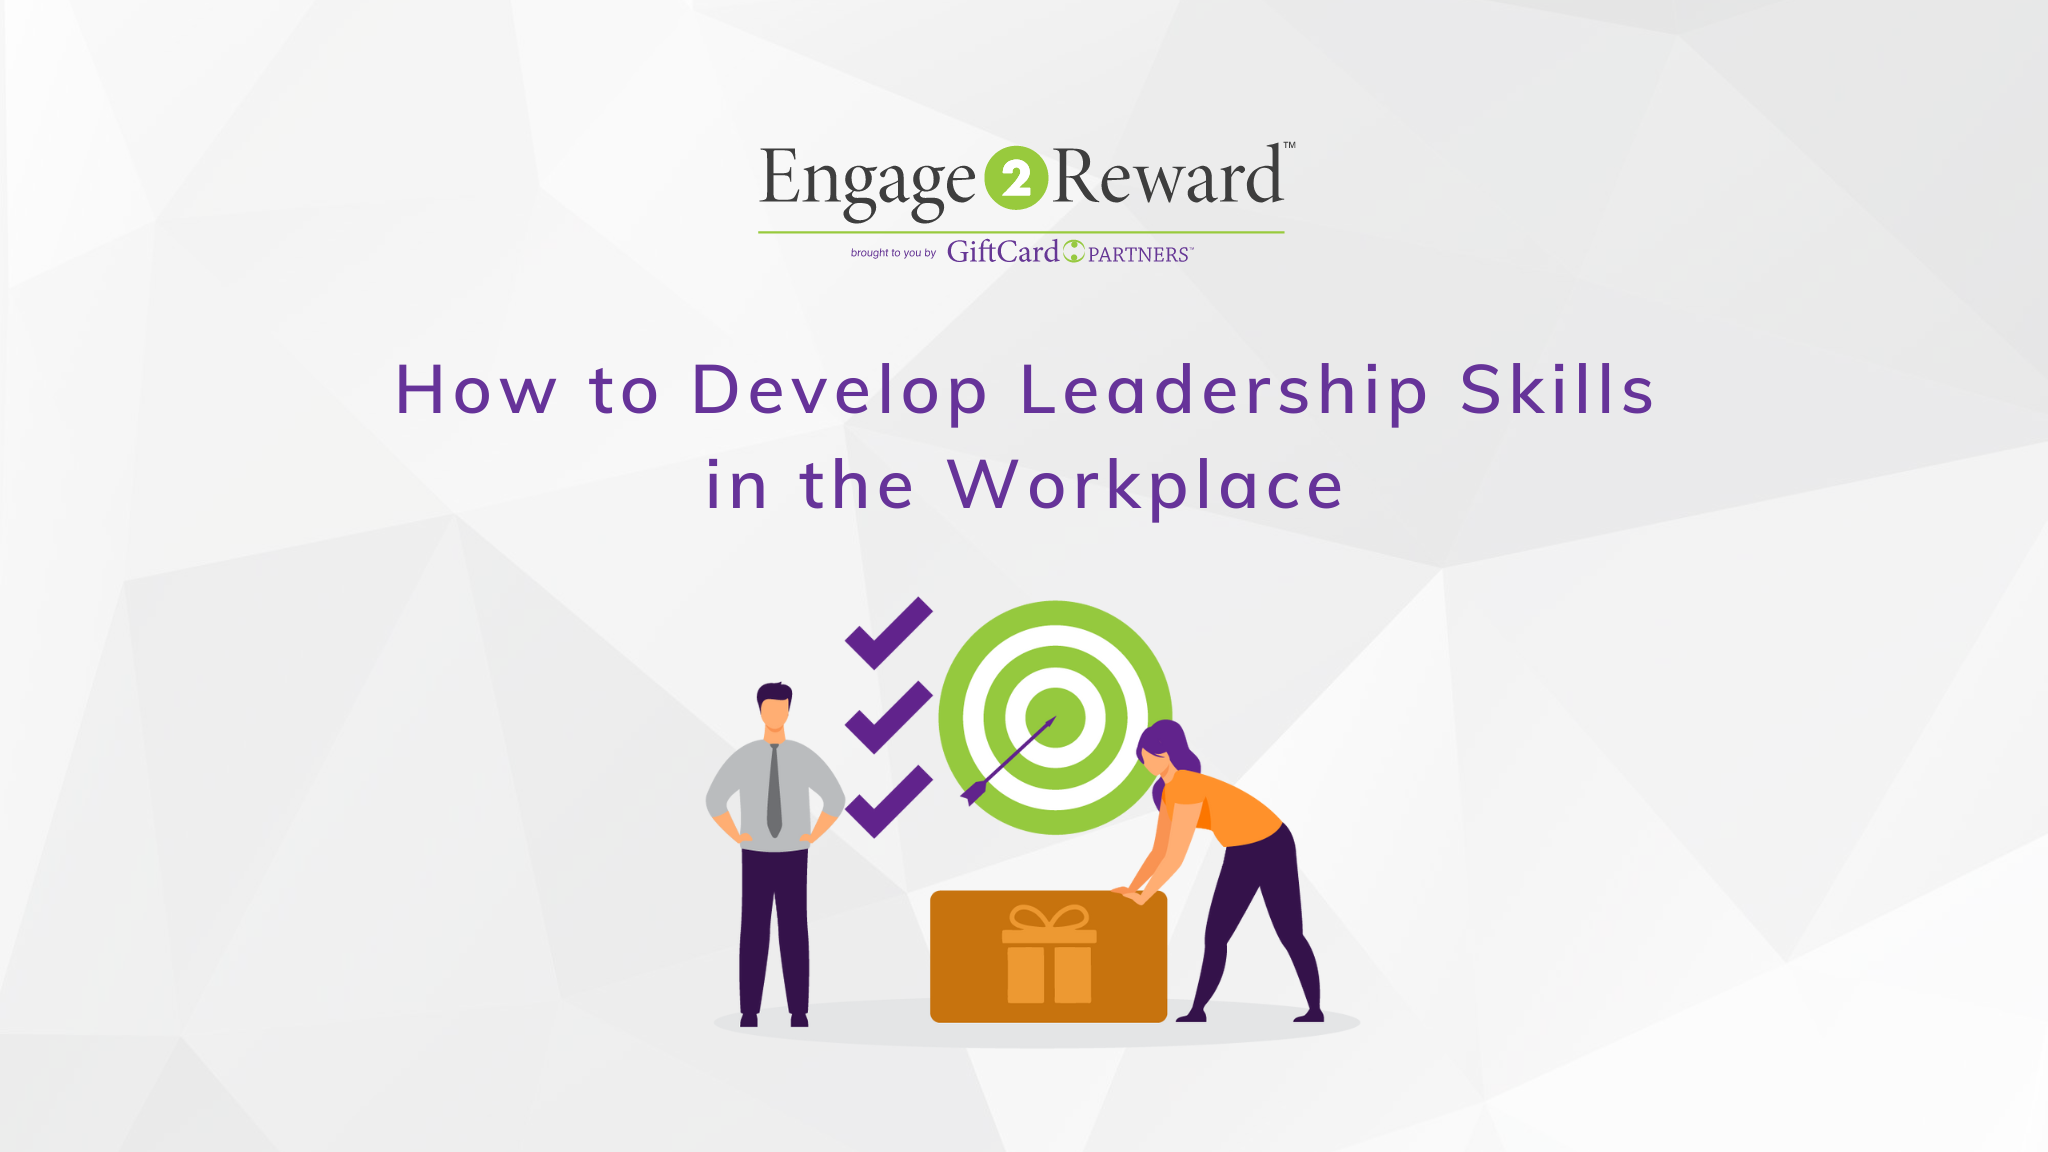 How to Develop Leadership Skills in the Workplace